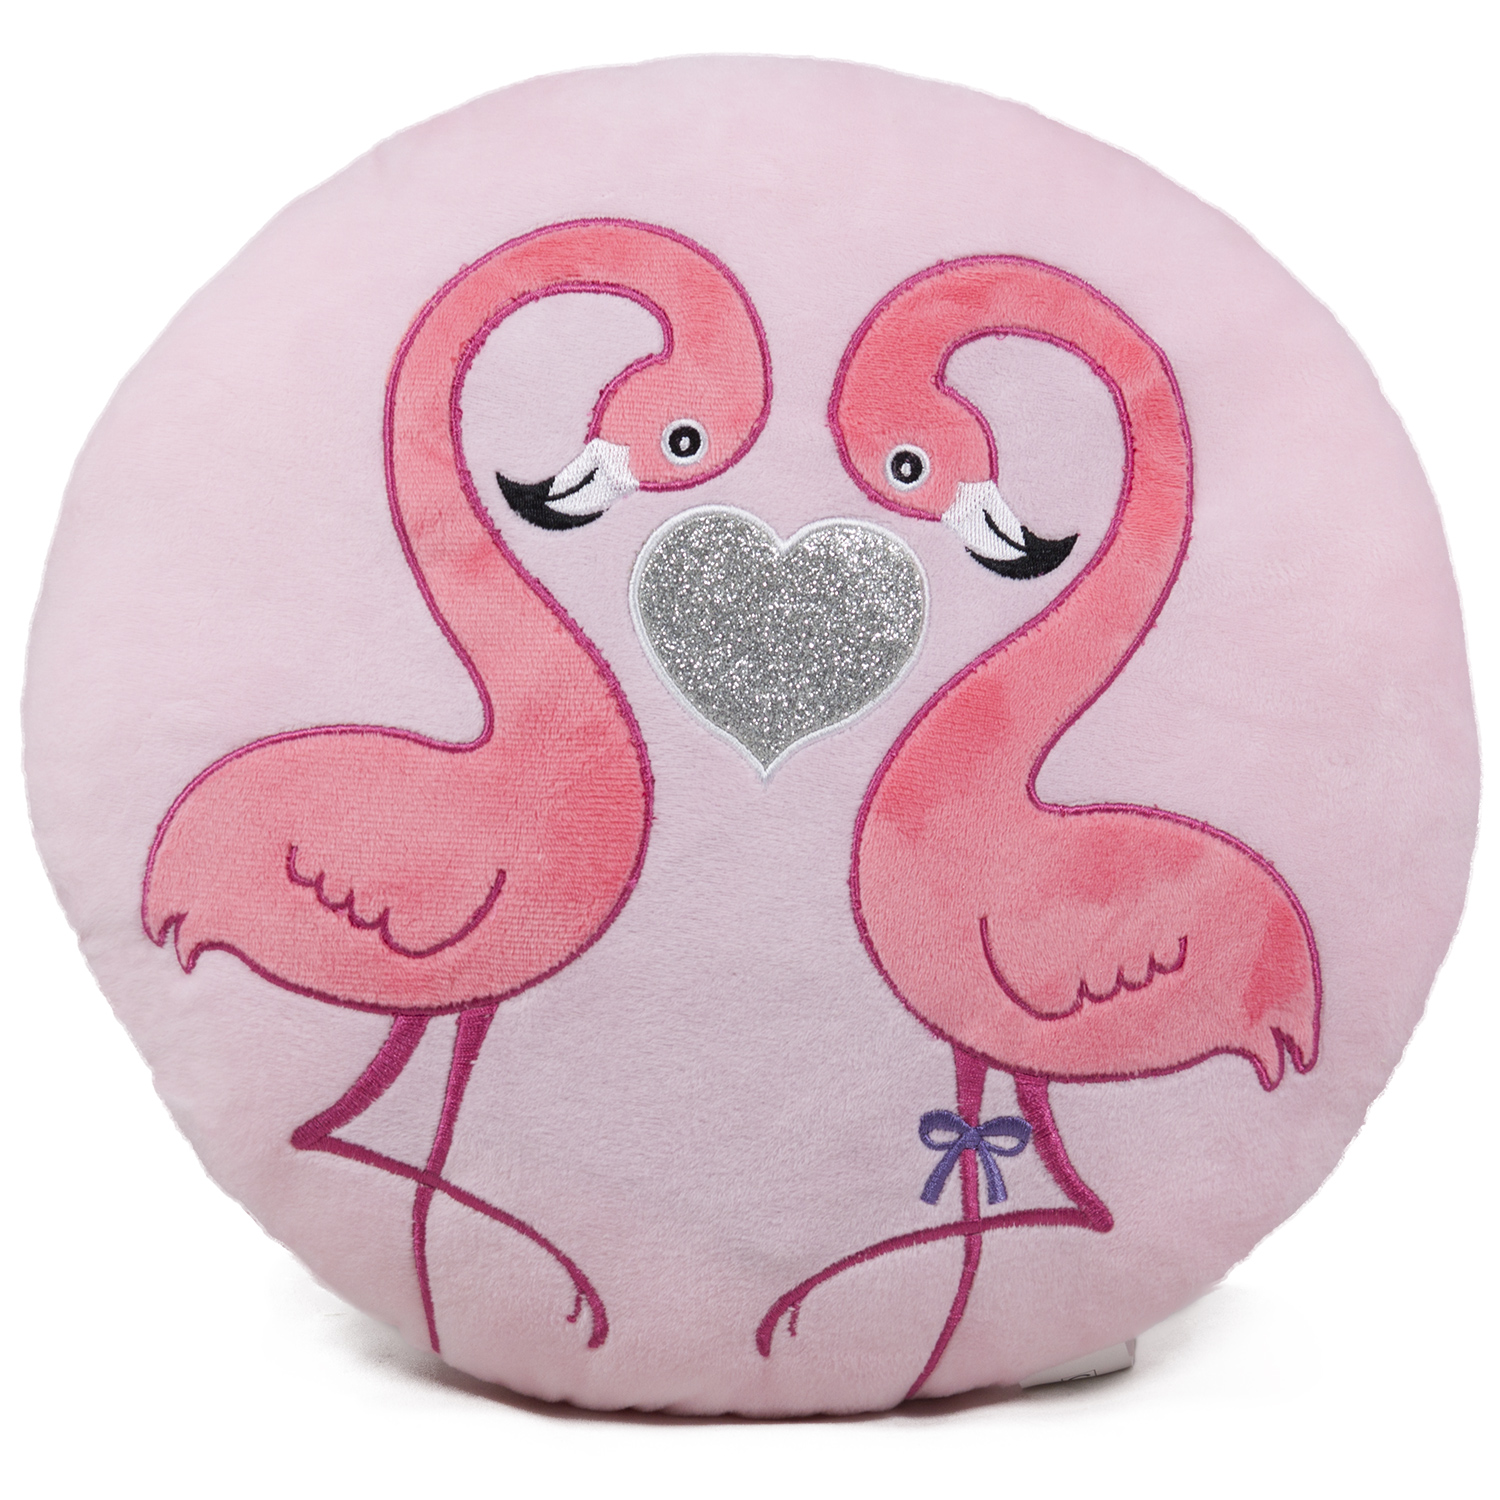 Pink flamingo pillow with heart